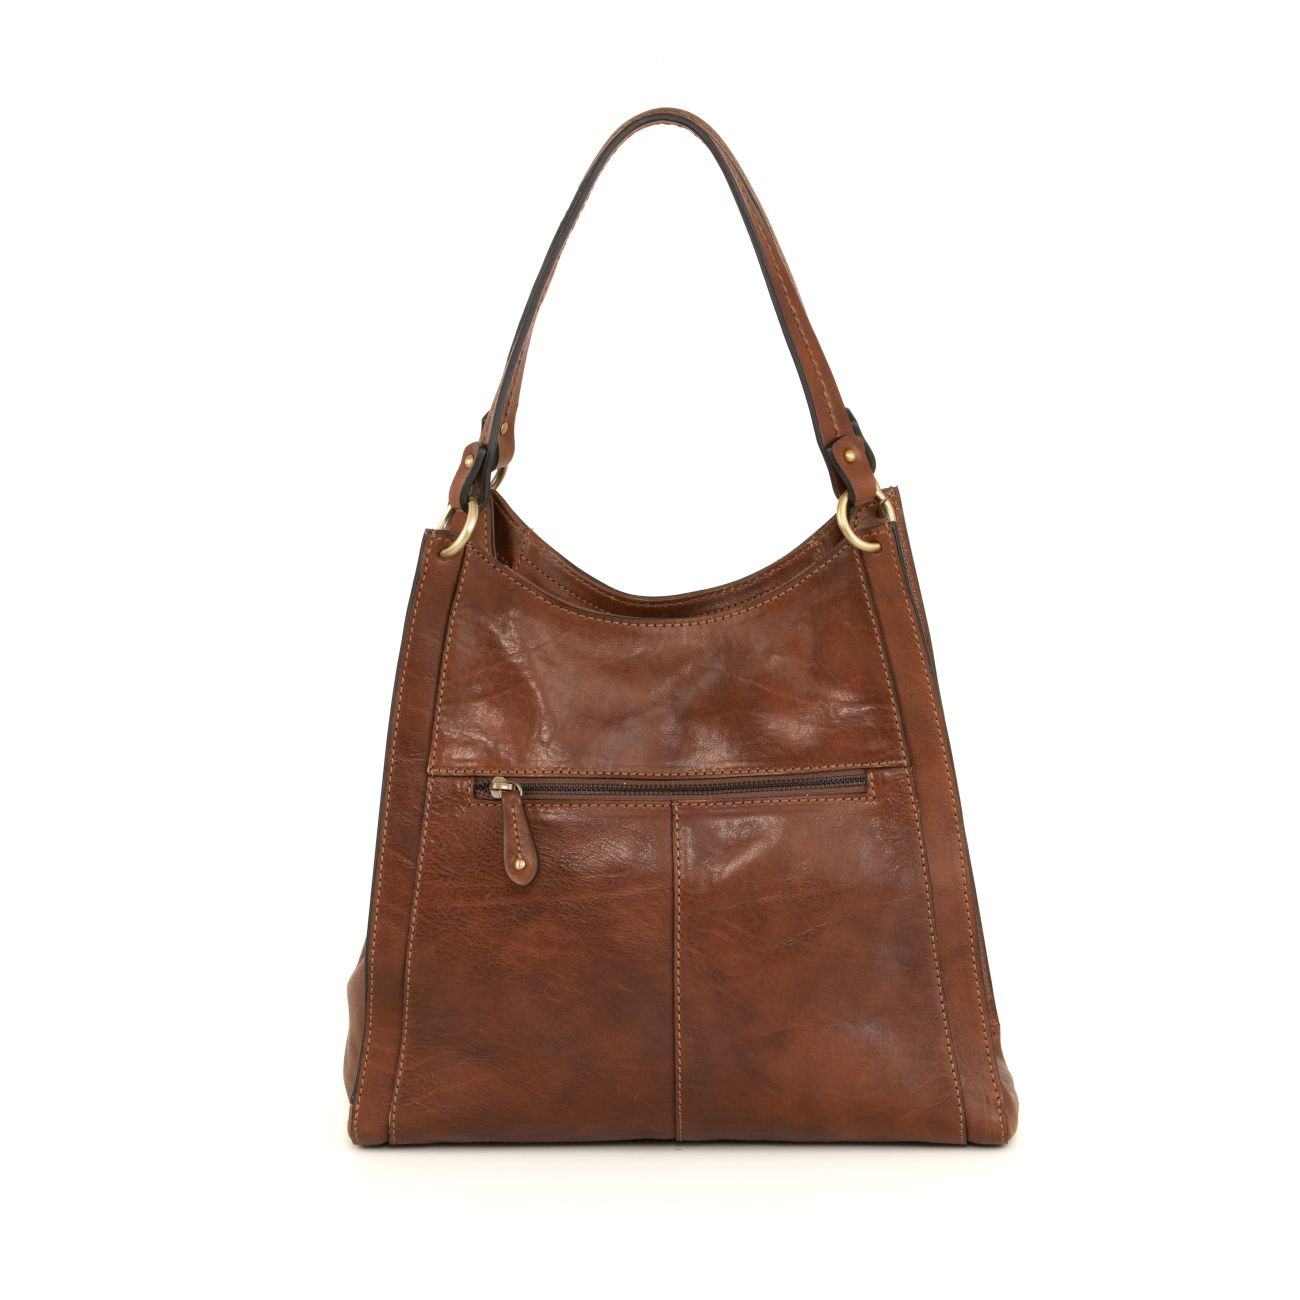 CINZIA by Gianni Conti - Vegetable-Tanned Leather Top Handle Bag